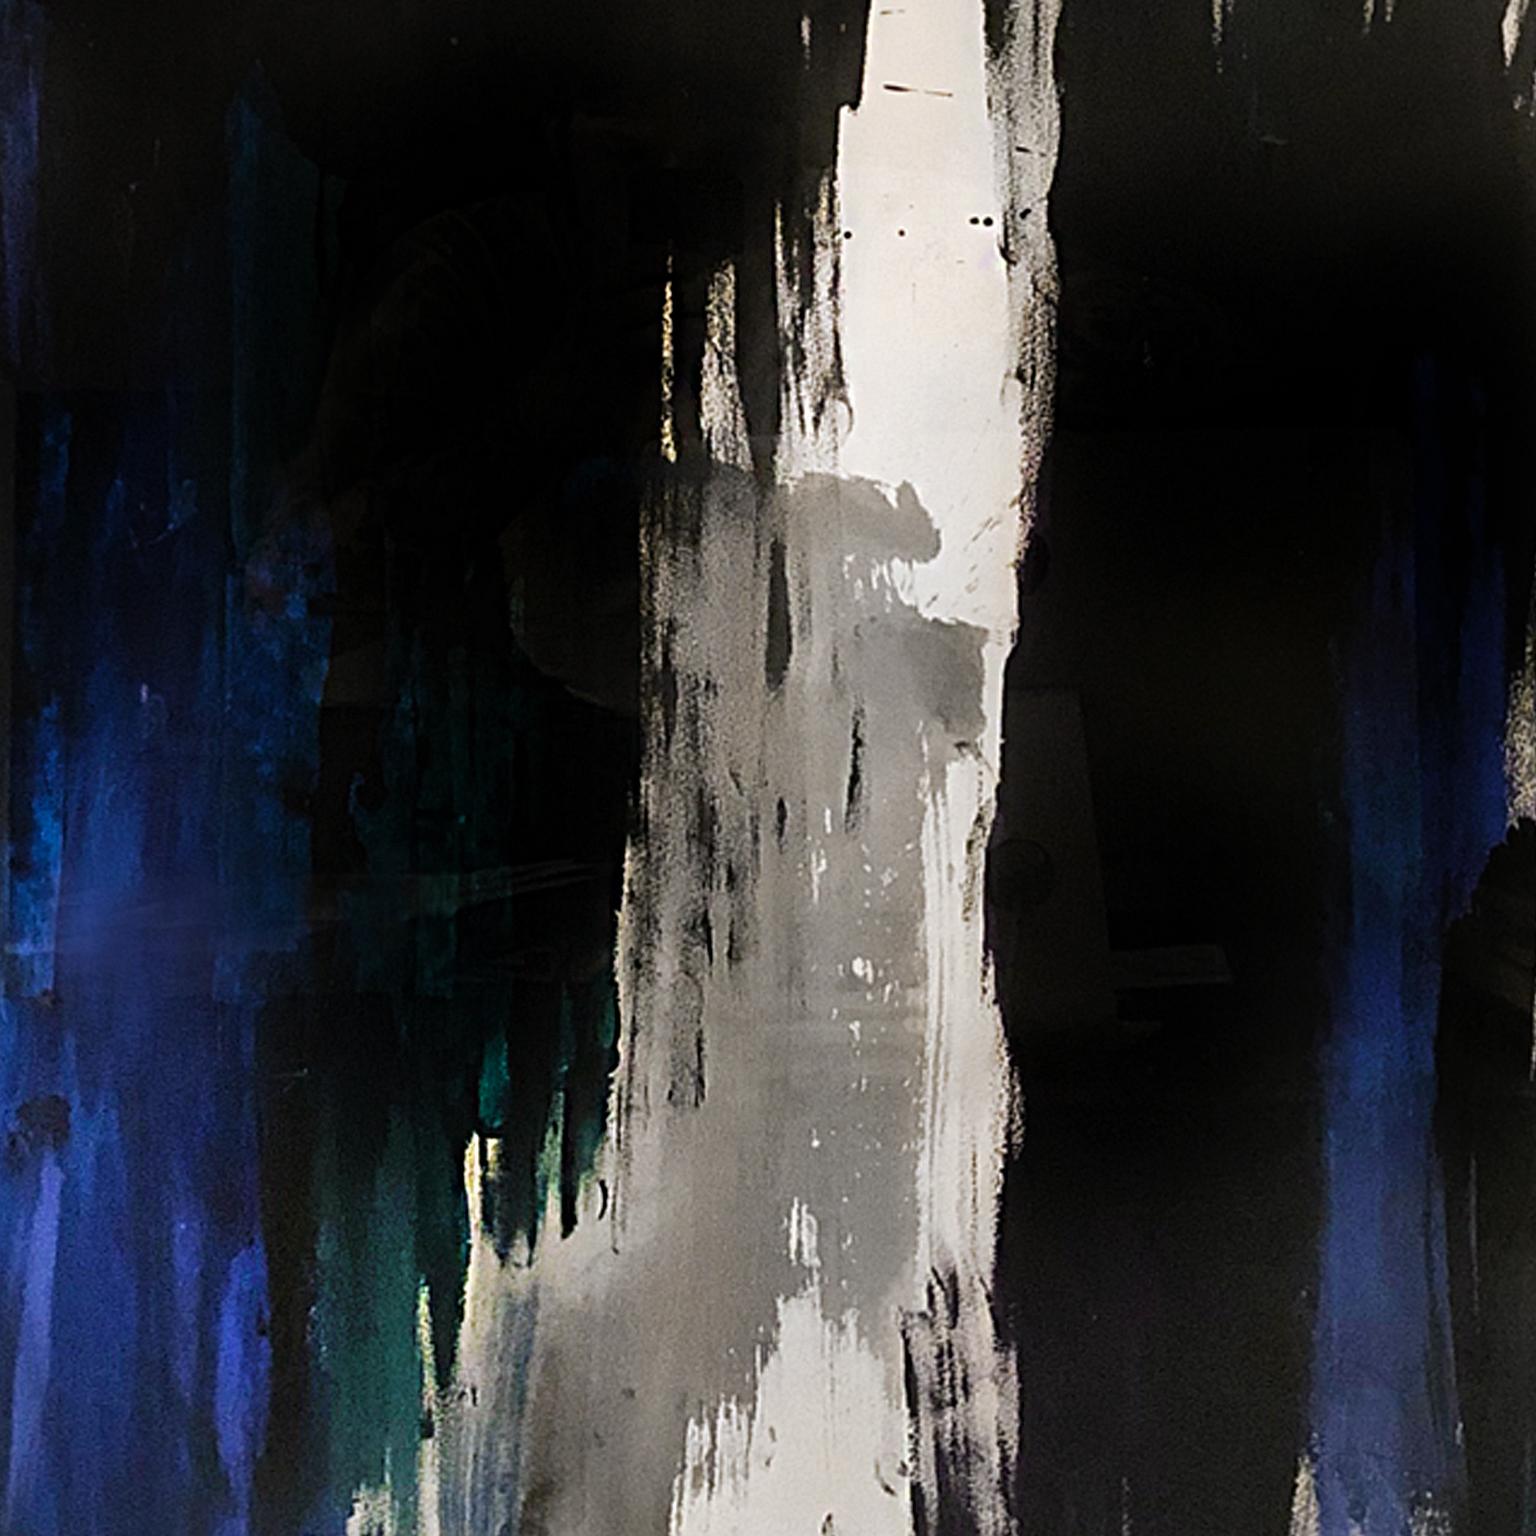 Blue, black, and green abstract painting on paper by Jenna Snyder-Phillips, 2013.